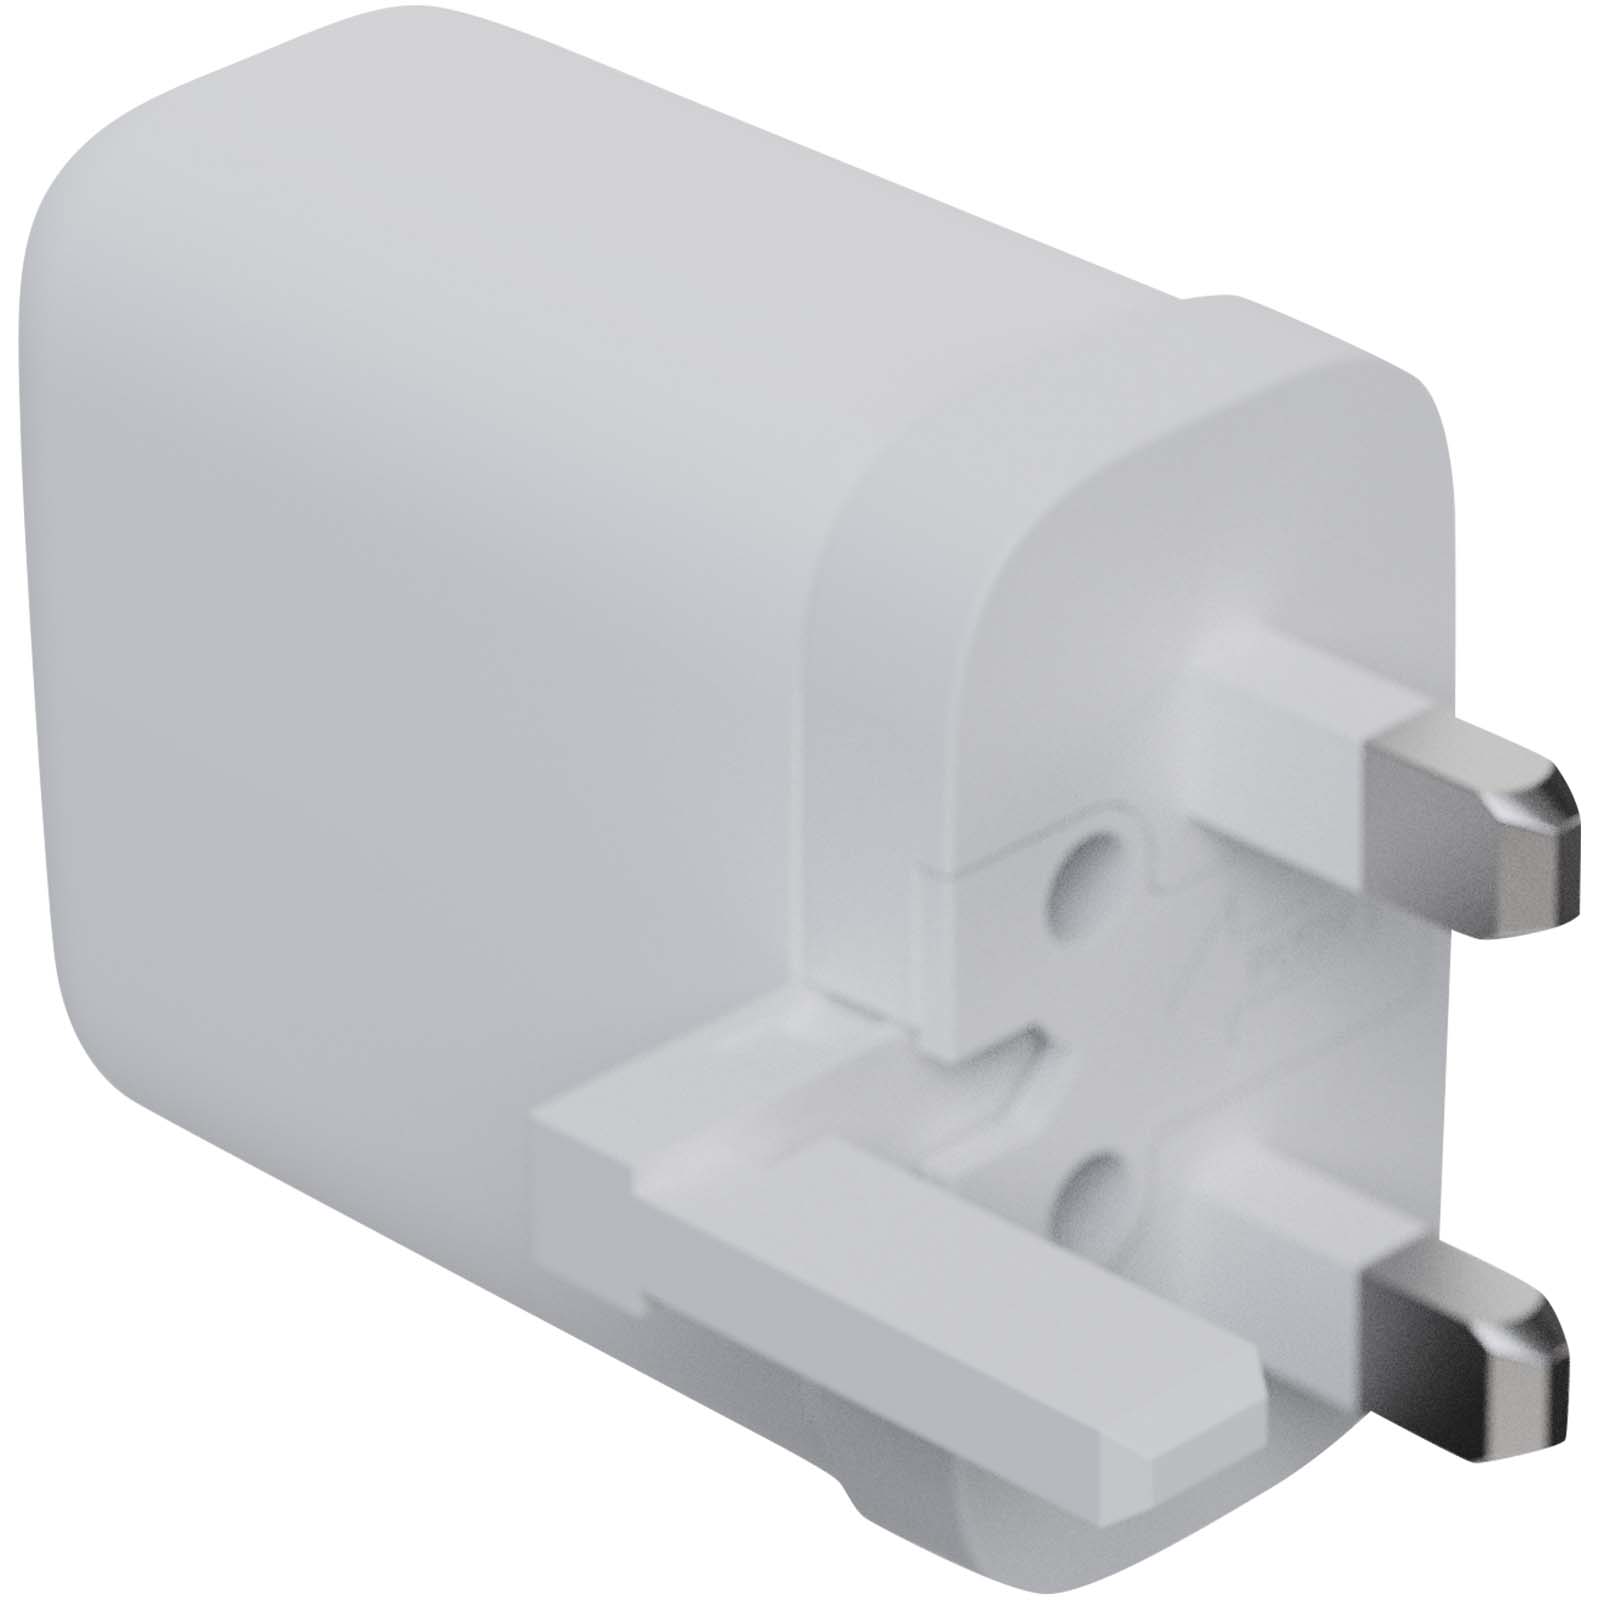 Advertising Chargers - Xtorm XEC067G GaN² Ultra 67W wall charger - UK plug - 7